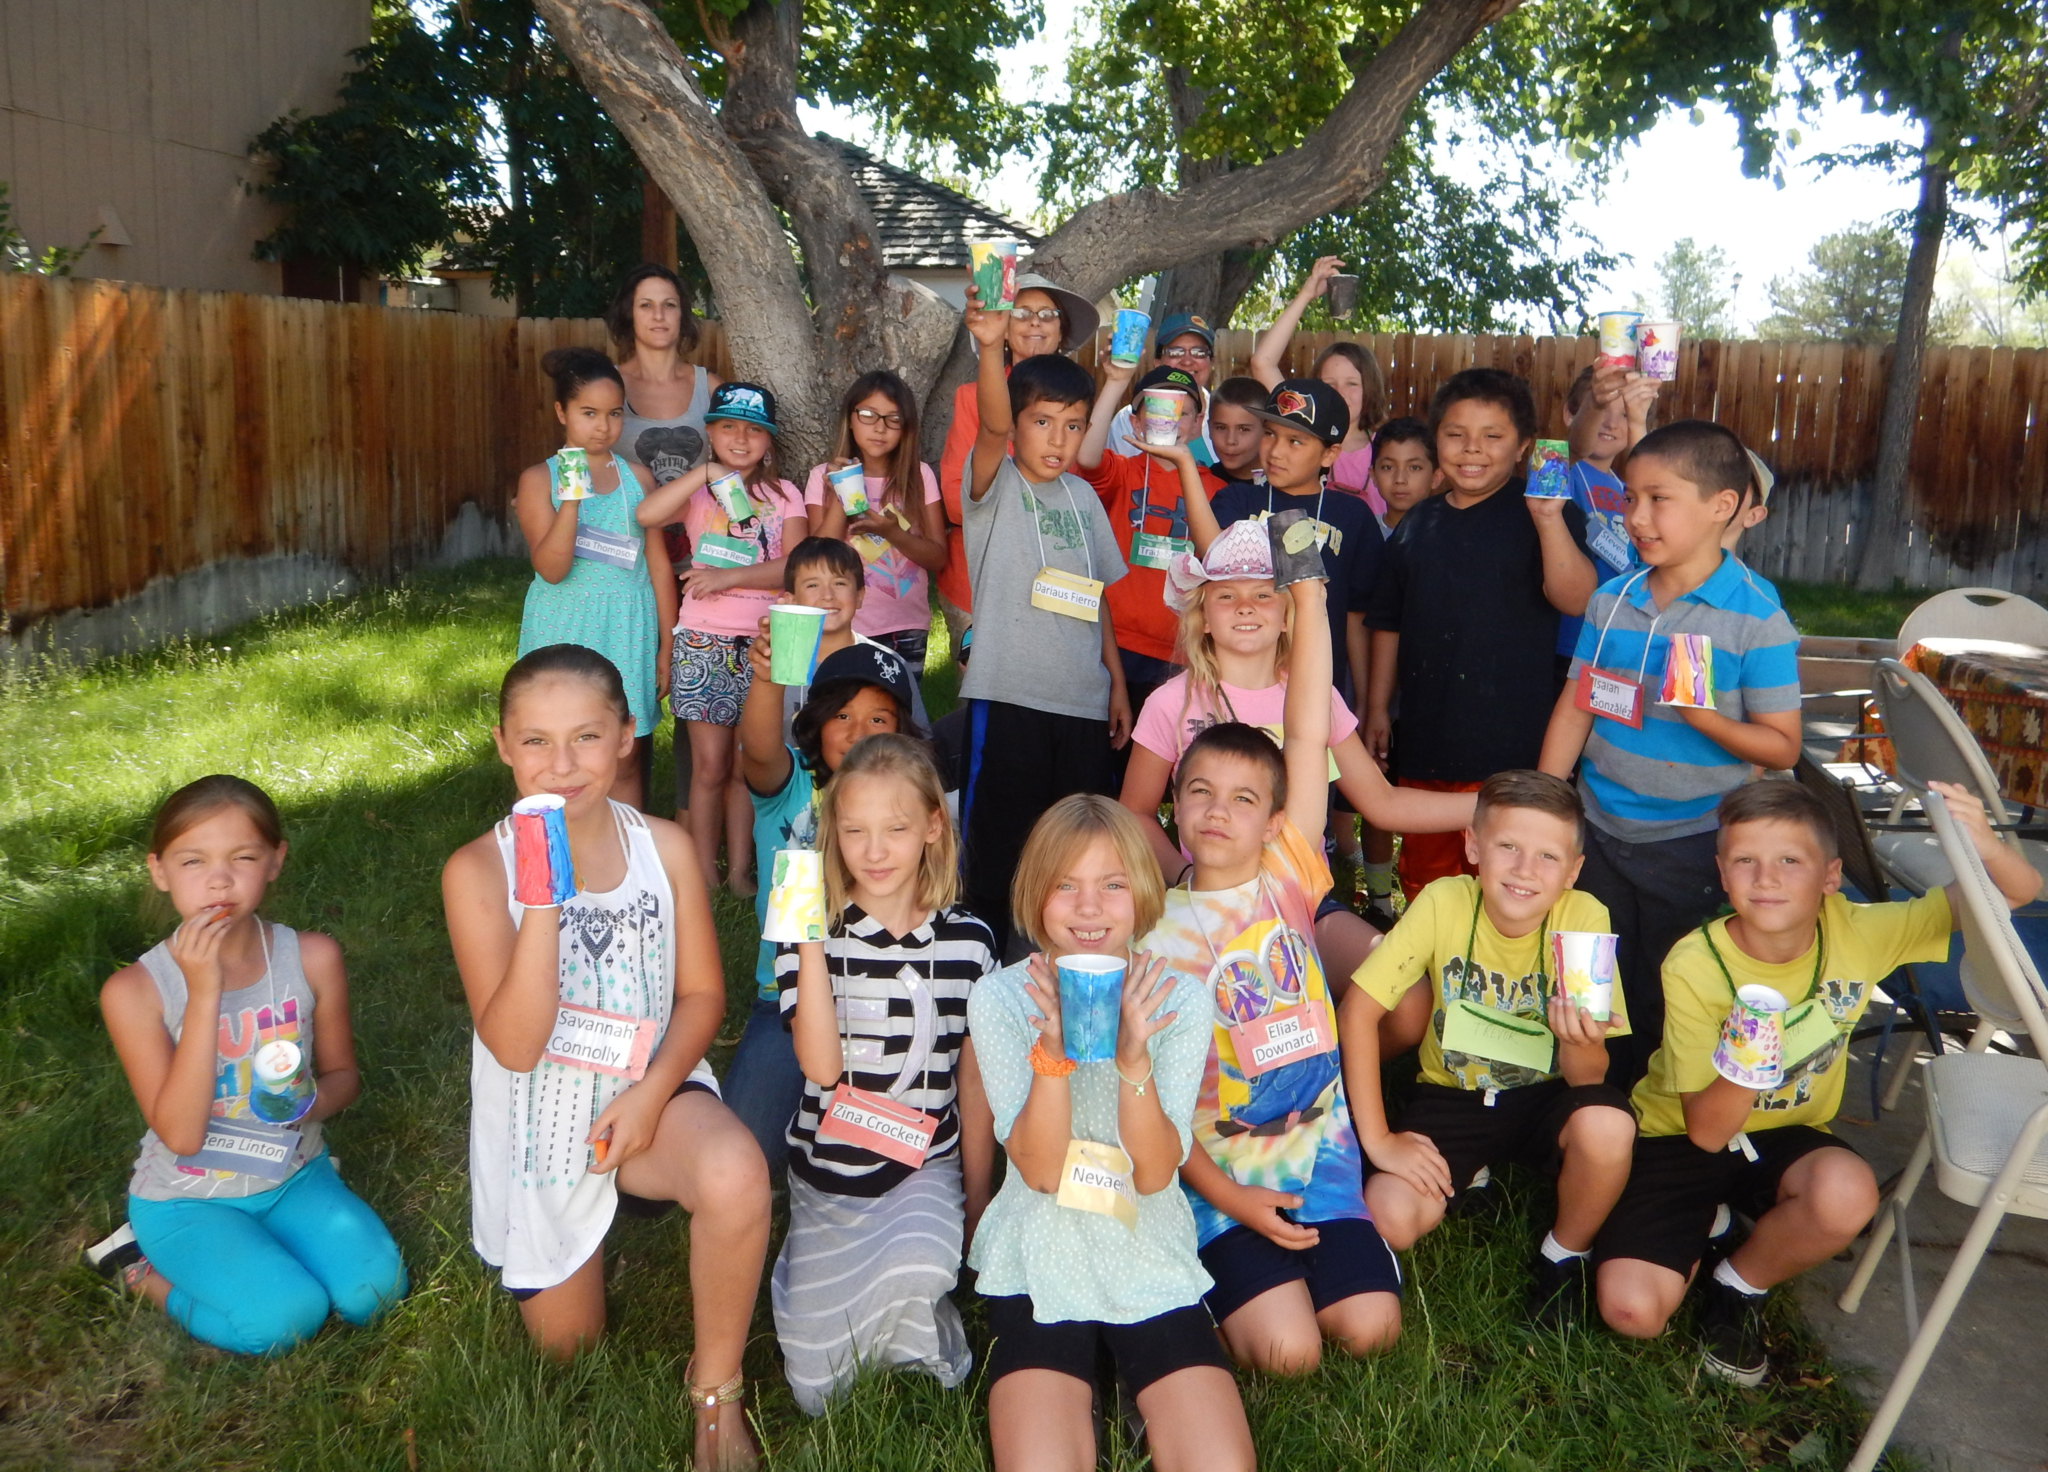 Kids in Victoria Hamilton's 3rd grade Bishop Elementary School Class proudly show off their painted flower pots at their Garden Party.